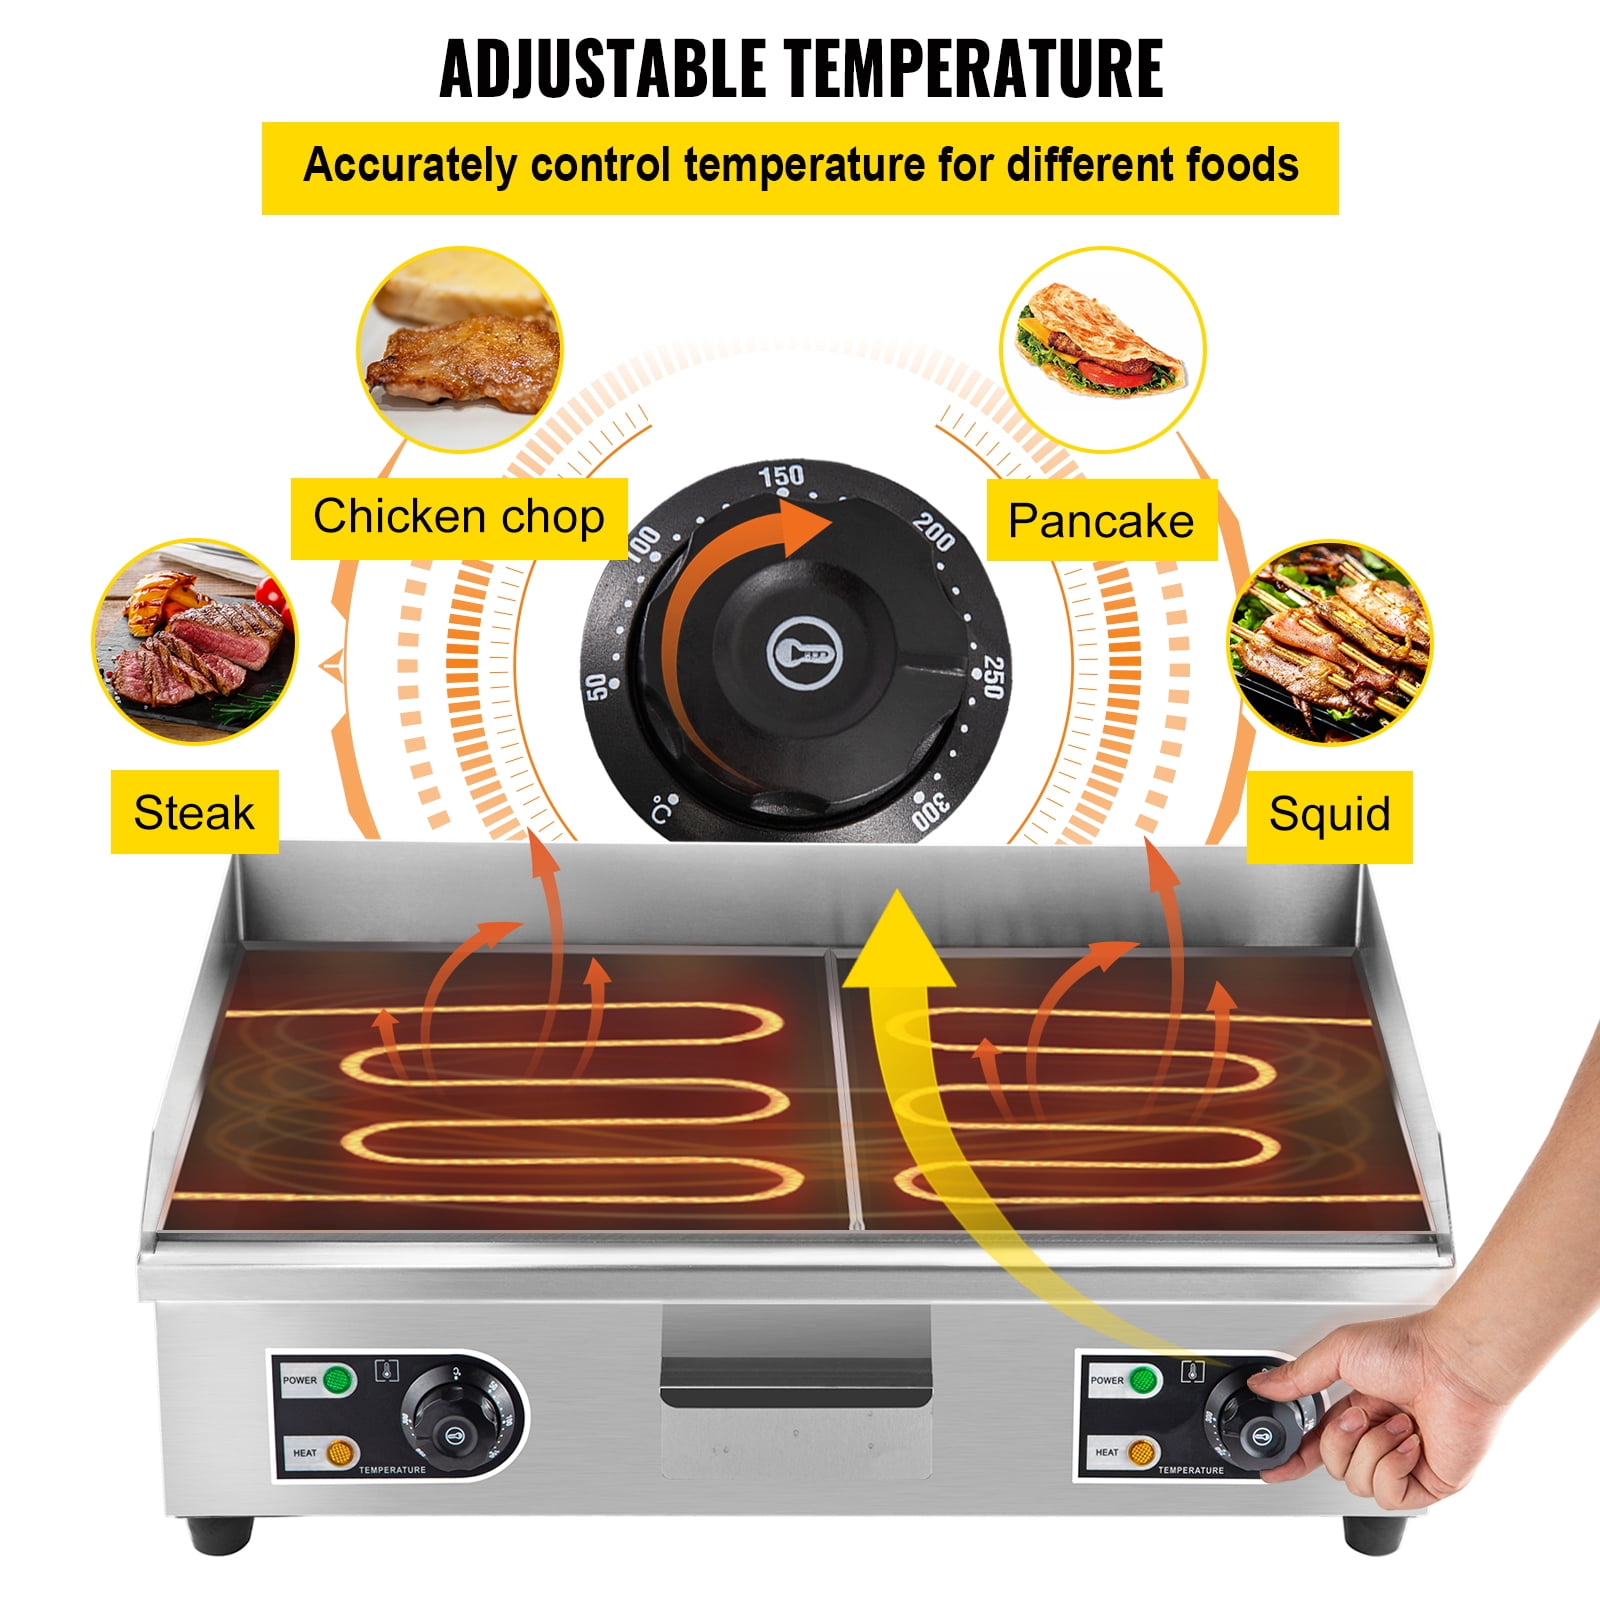 3000W 21.6 Electric Countertop Flat Top Griddle Grill Non-Stick Commercial Restaurant Teppanyaki Grill Stainless Steel Tabletop Flat Top Grill